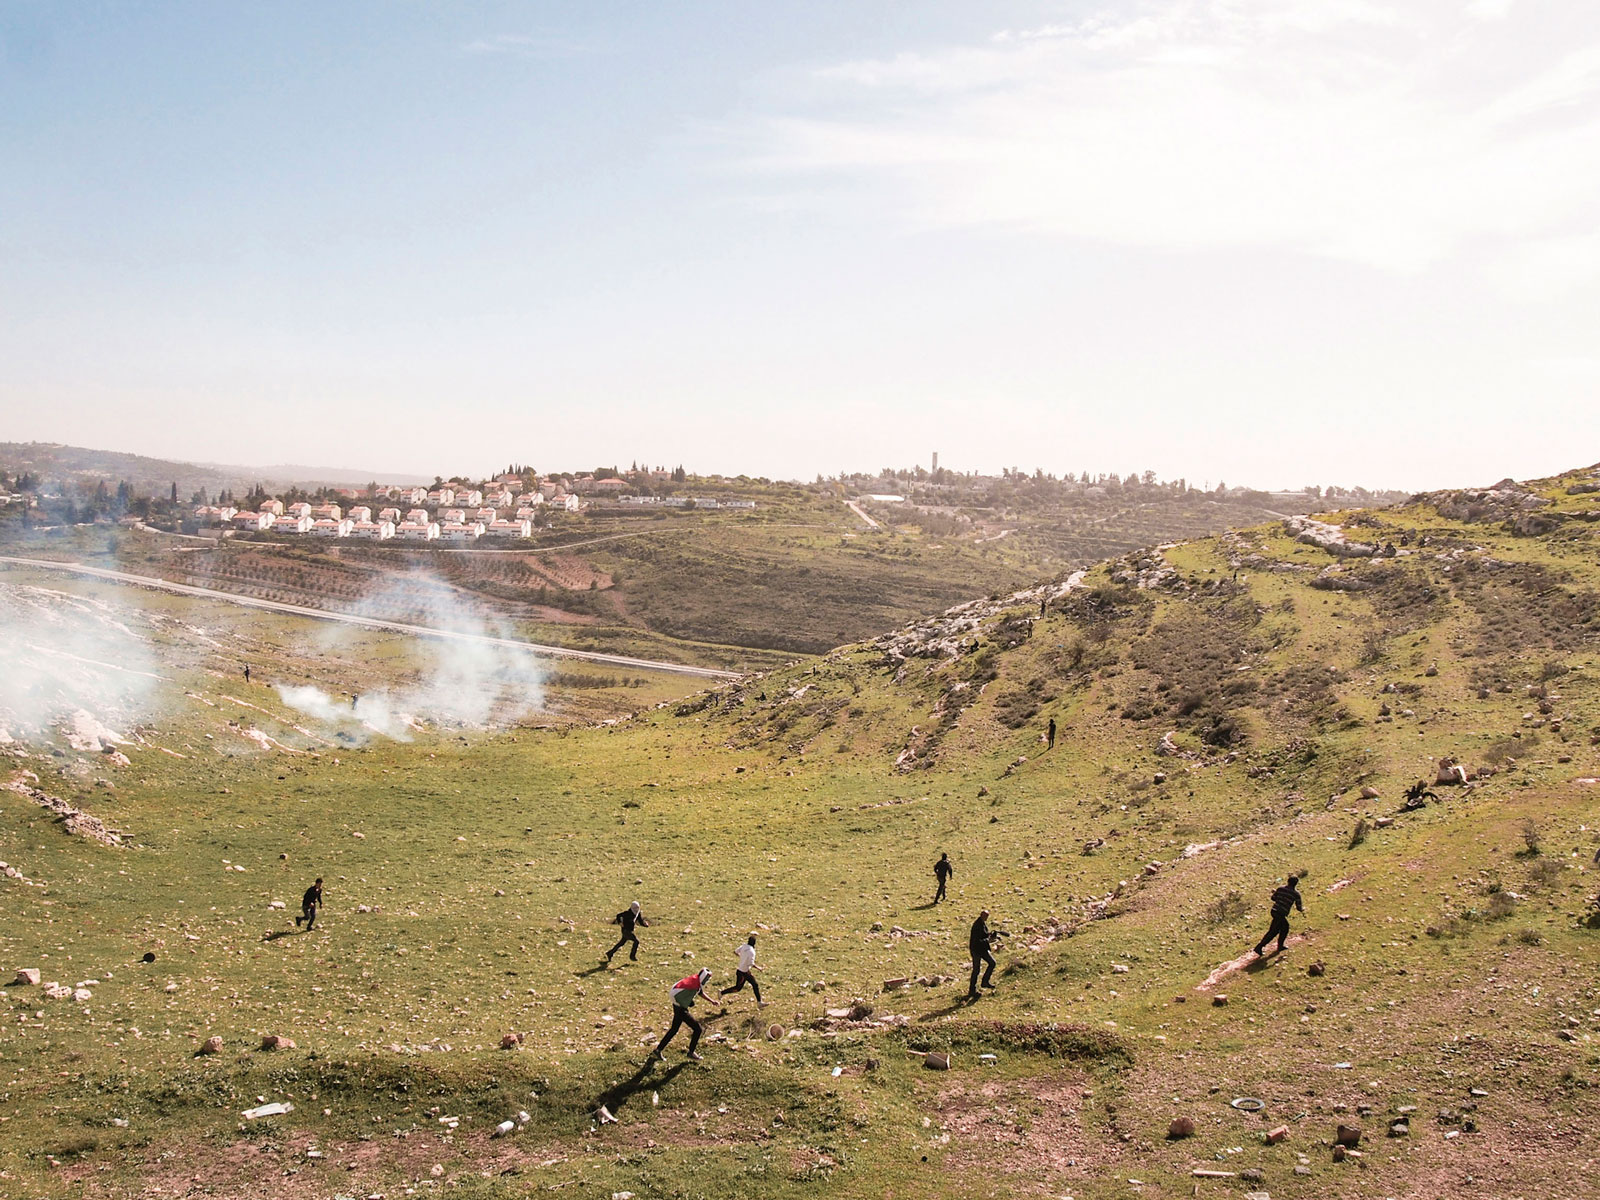 Palestinian protestors running from tear gas fired by Israeli soldiers at a weekly protest against the Israeli occupation, West Bank, Nabi Saleh, 2013